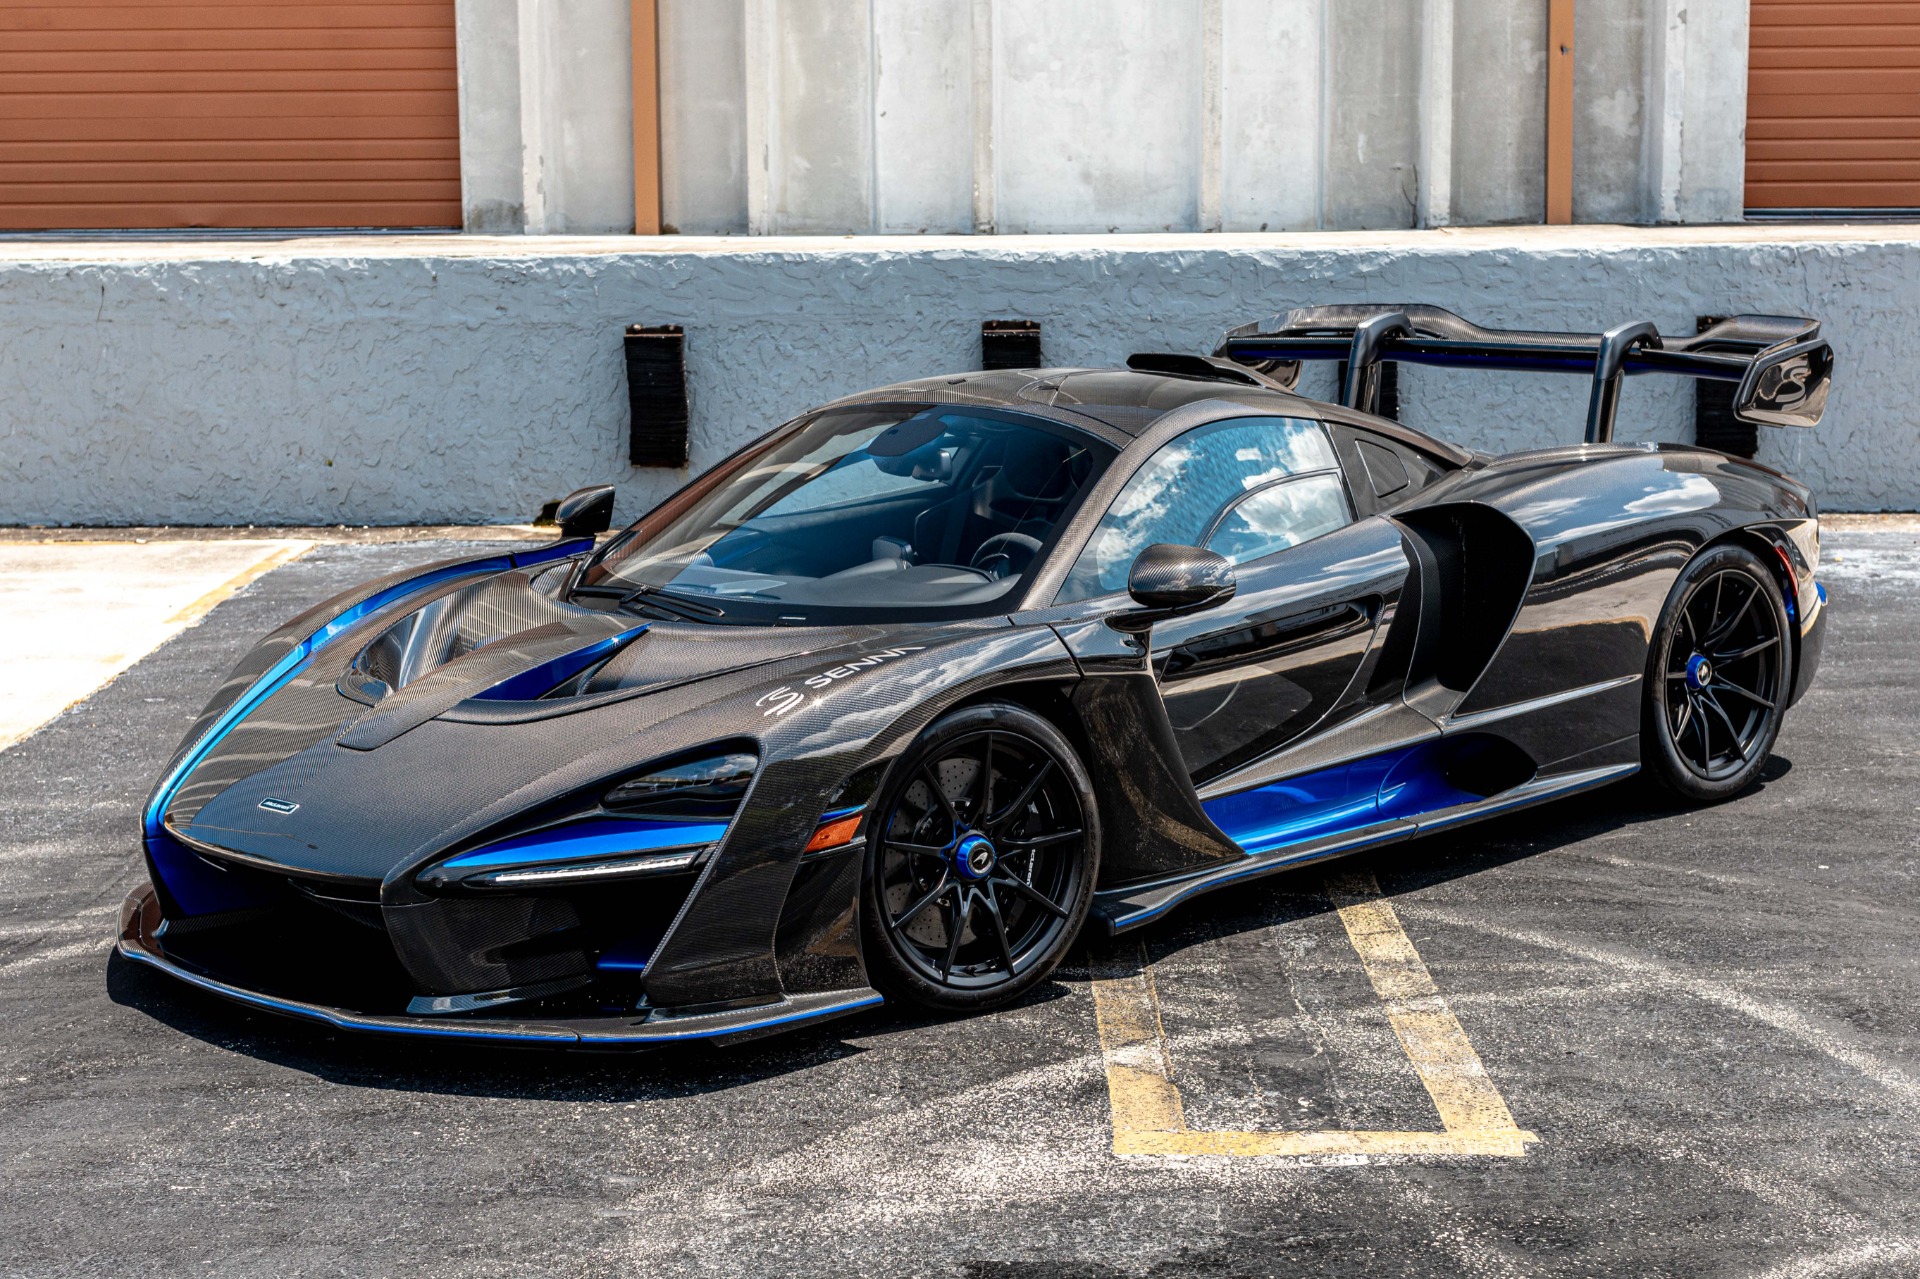 Used 2019 Mclaren Senna 13 In Gloss Carbon 138m Msrp Electric Blue Accents And Gold